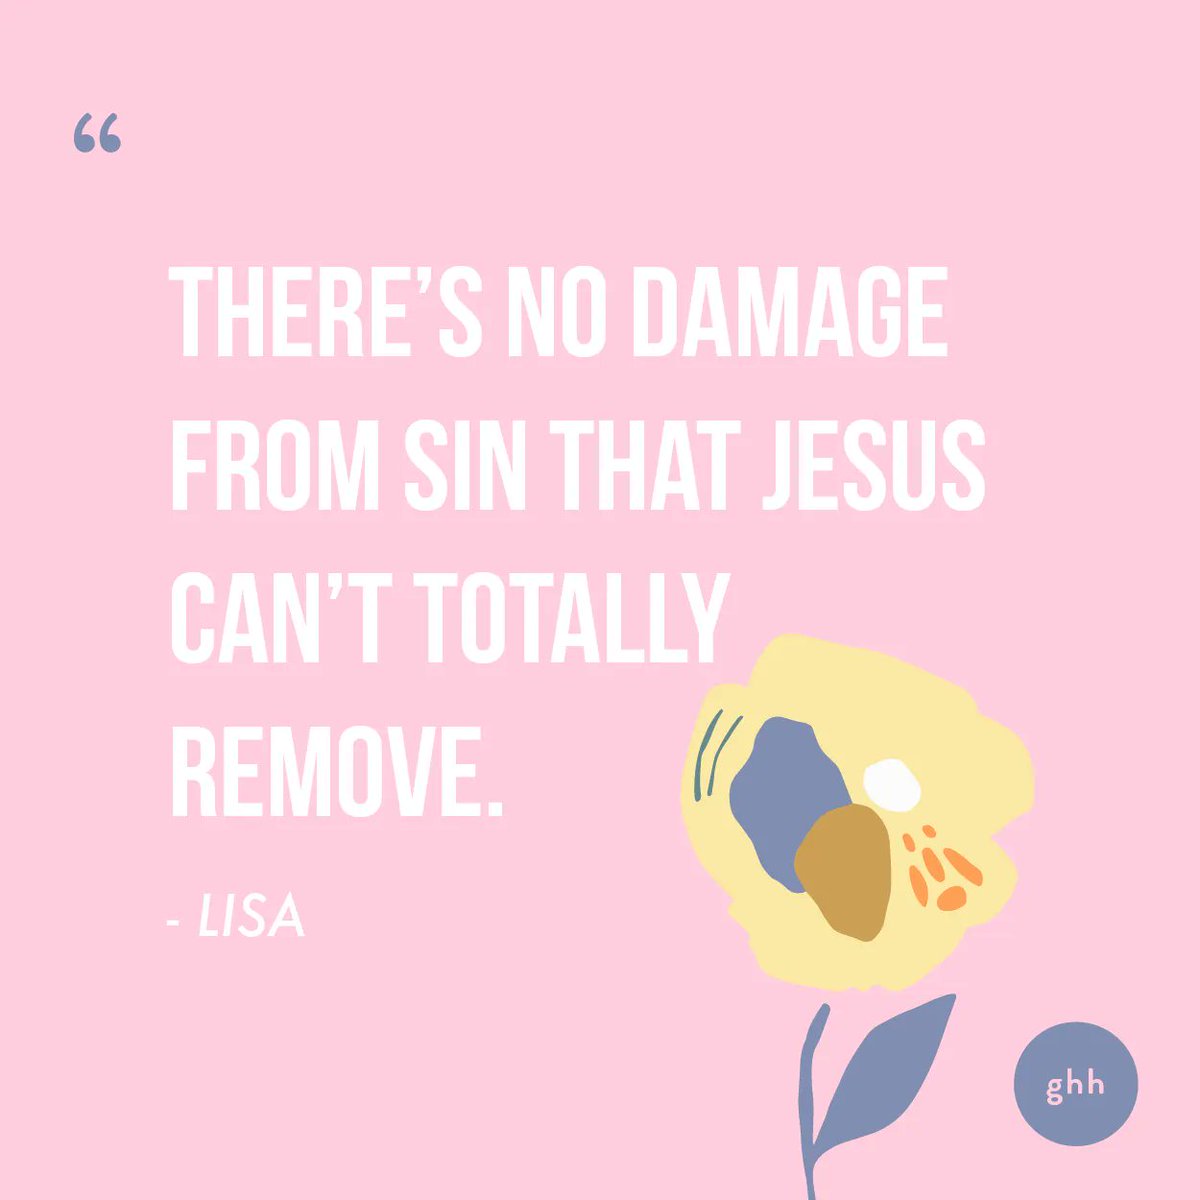 God can wash away the effects of sin for anyone willing to return to Him. Through Christ, we can live each day in freedom and hope.
—Lisa Samra 

#godseesher
#sin
#washedclean